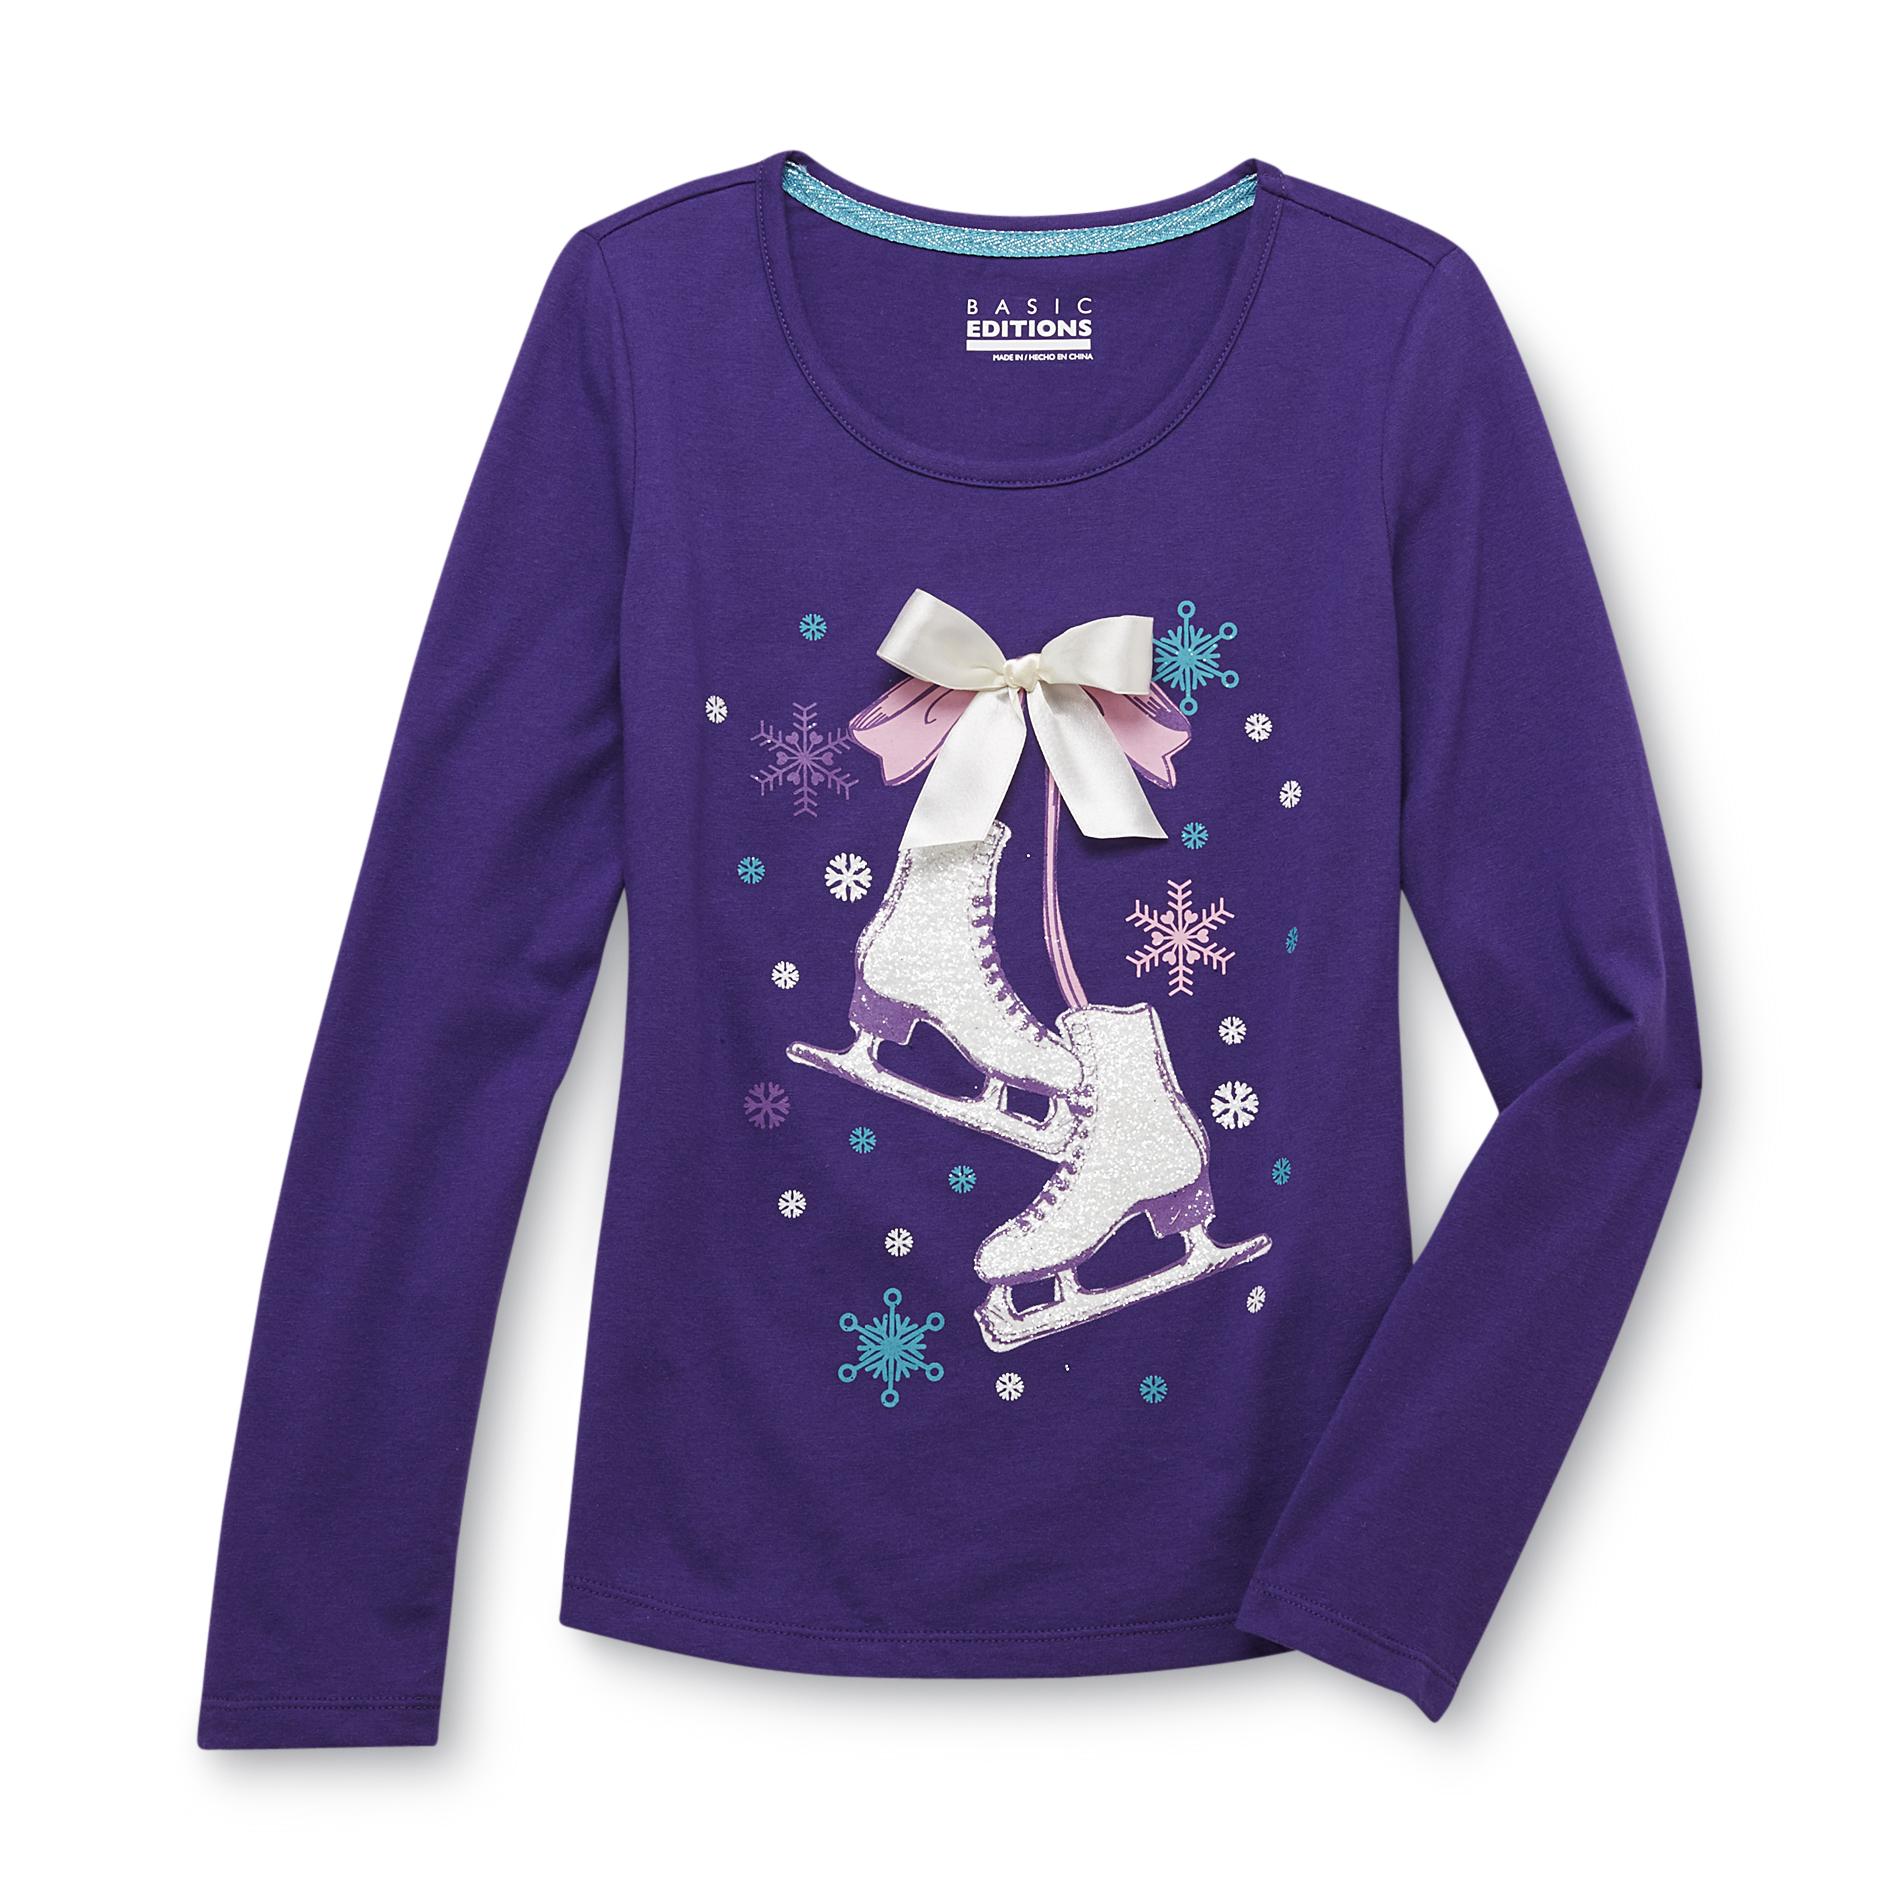 Basic Editions Girl's Graphic Top - Ice Skates